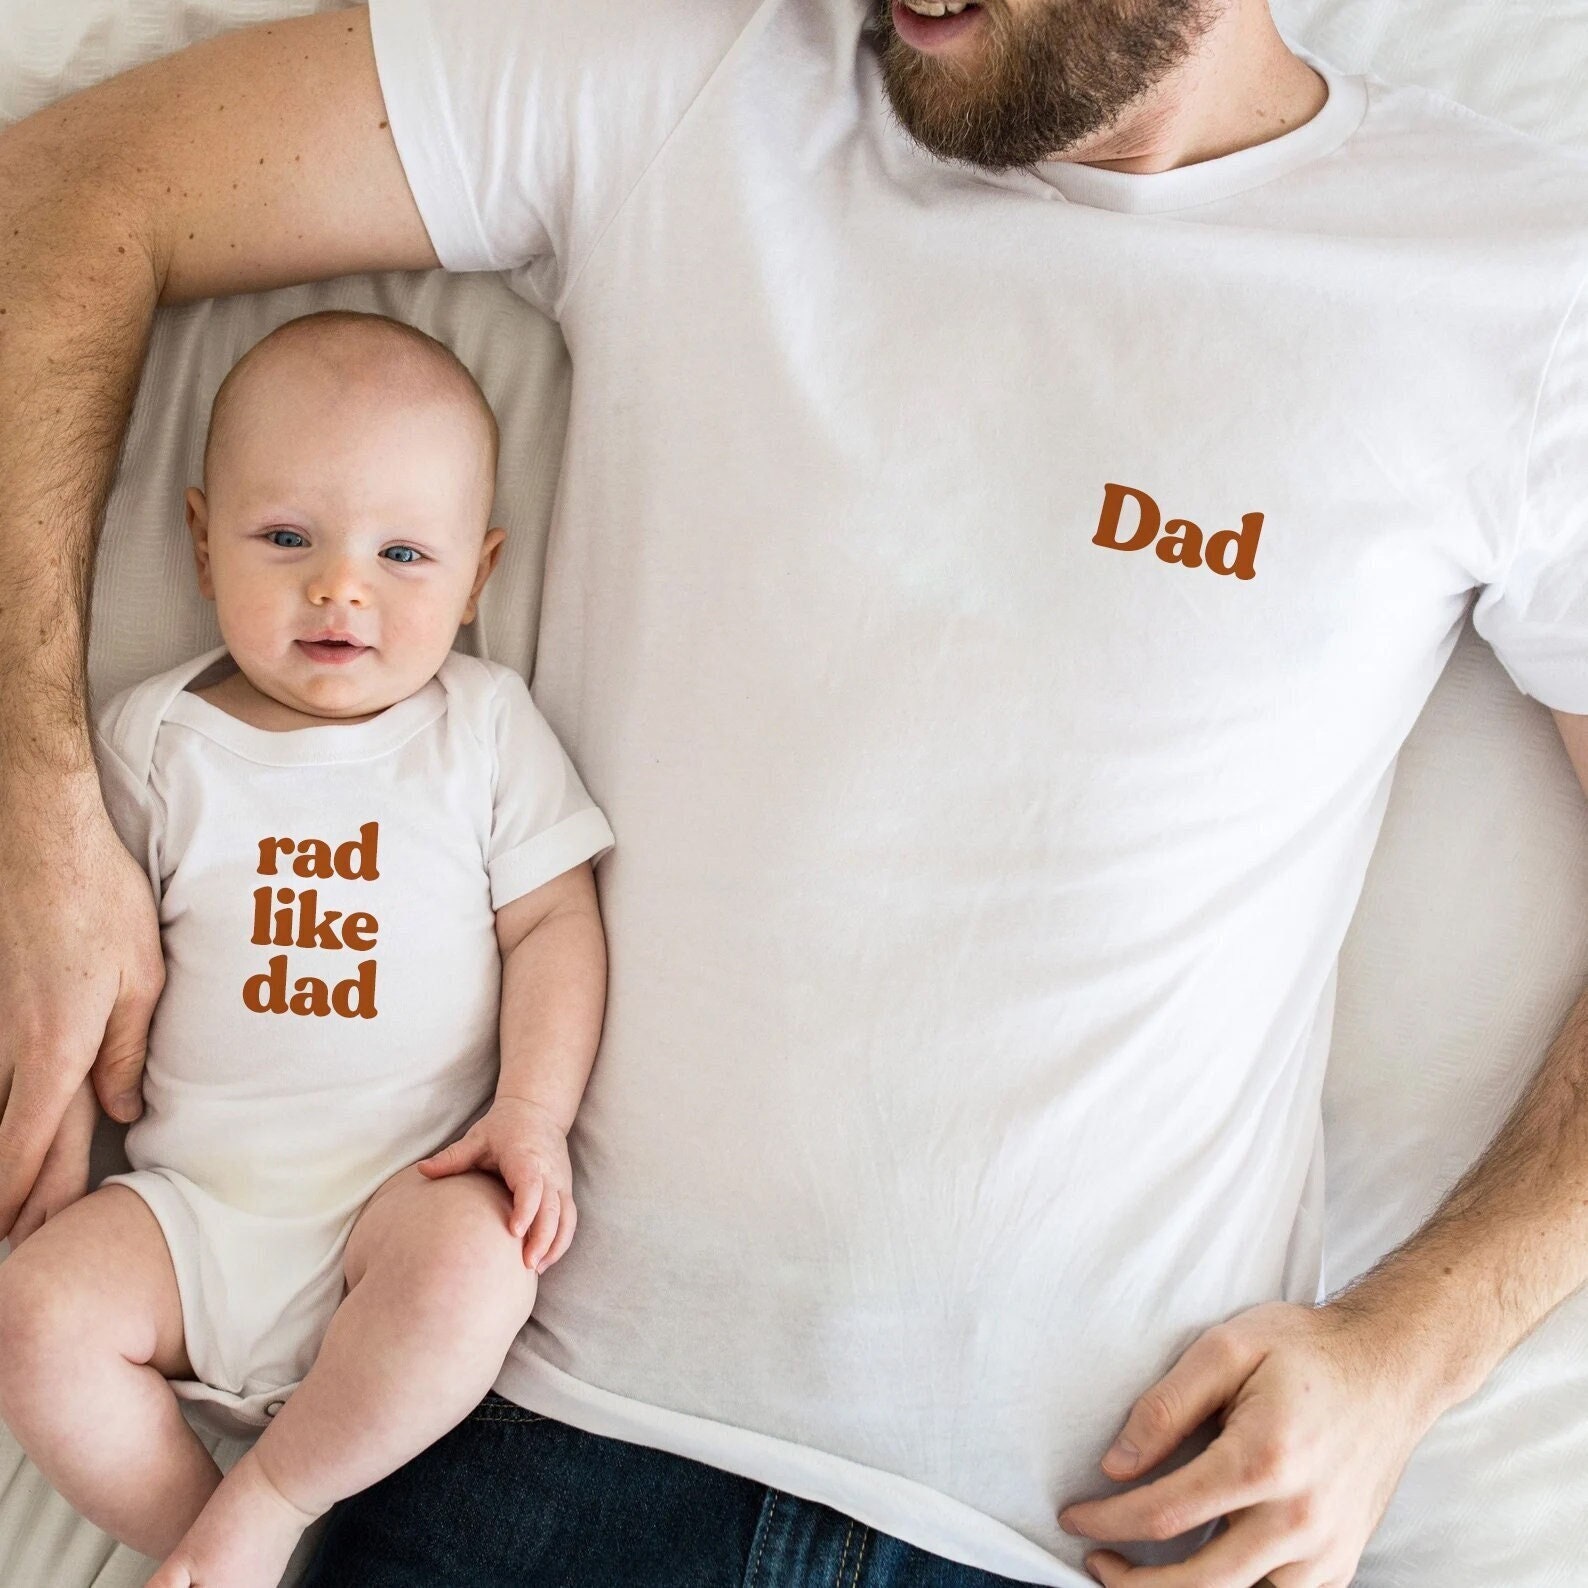 Father's Day Shirt Father Son Tees Kleding Herenkleding Overhemden & T-shirts T-shirts Daddy & me matching shirts Father's Day Shirt Biggie and Smalls Shirt Set Father son matching shirts 